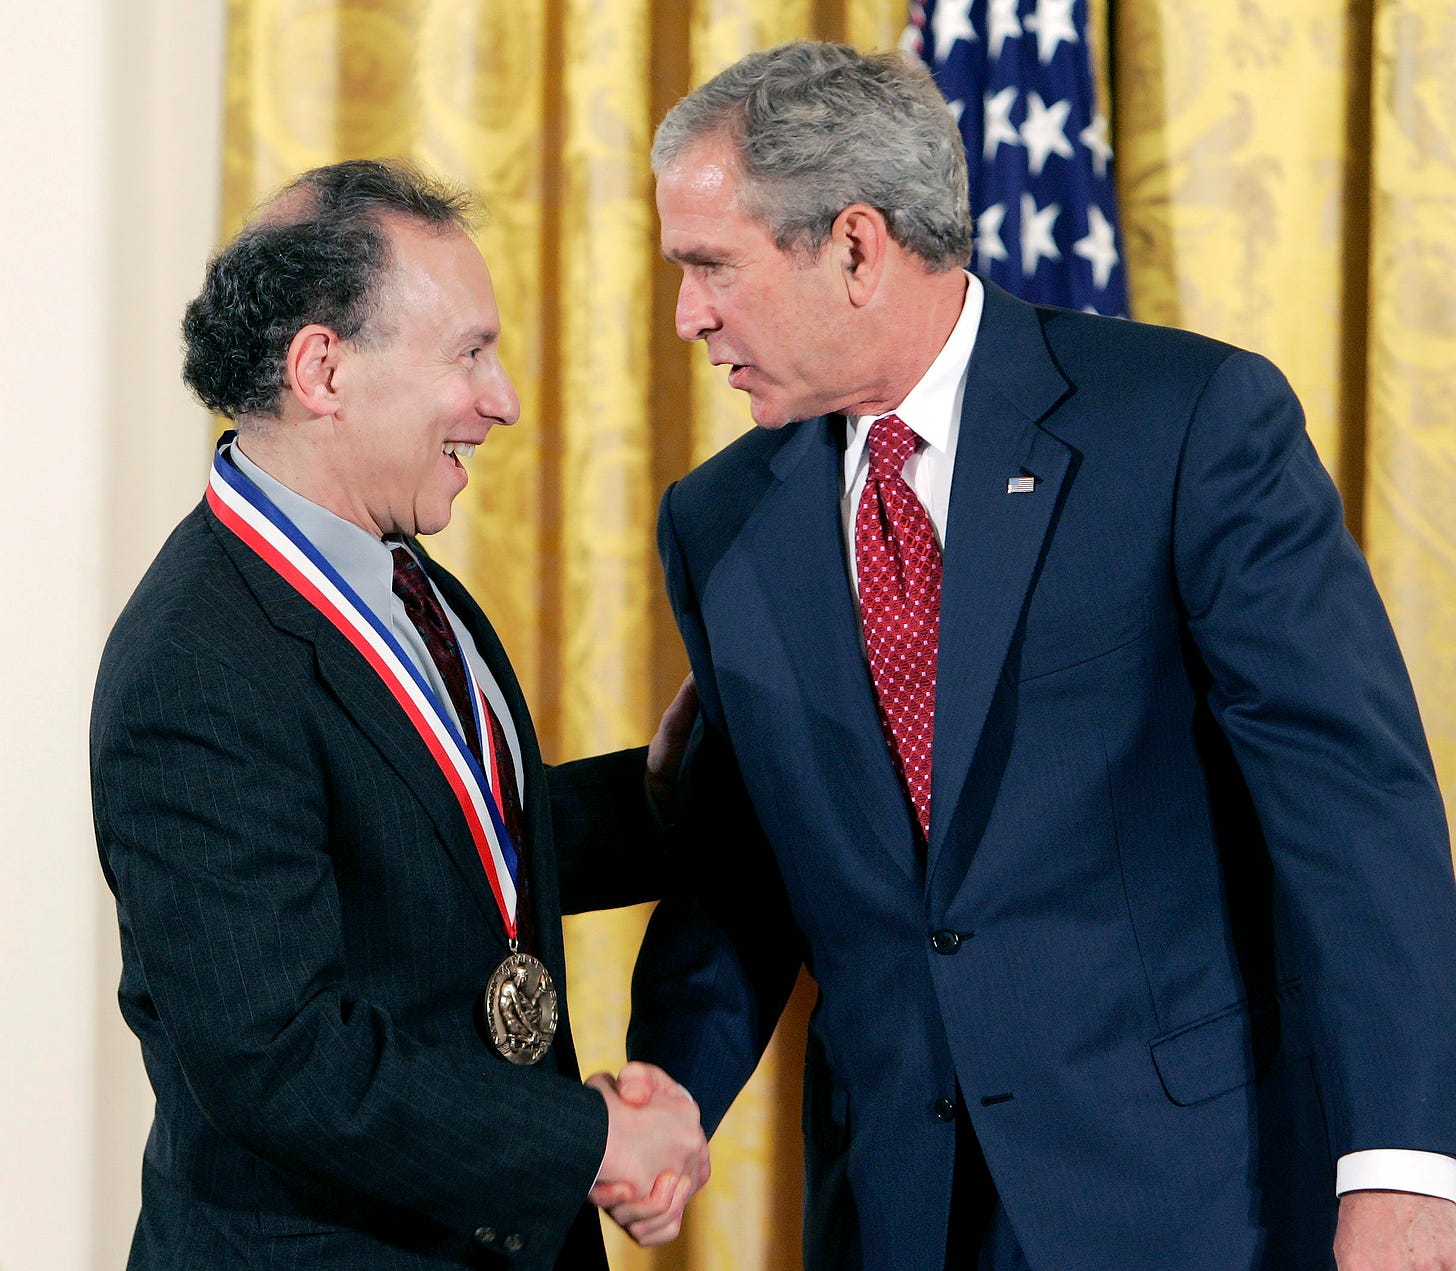 27 Jul 2007, Washington, DC, USA --- U.S. President George W. Bush (R) awards the 2006 National Medal of Science to Robert Langer (Massachusetts Institute of Technology) during the awards ceremony for the National Medals of Science and Technology in the East Room of the White House, July 27, 2007. REUTERS/Larry Downing (UNITED STATES) --- Image by © LARRY DOWNING/Reuters/Corbis